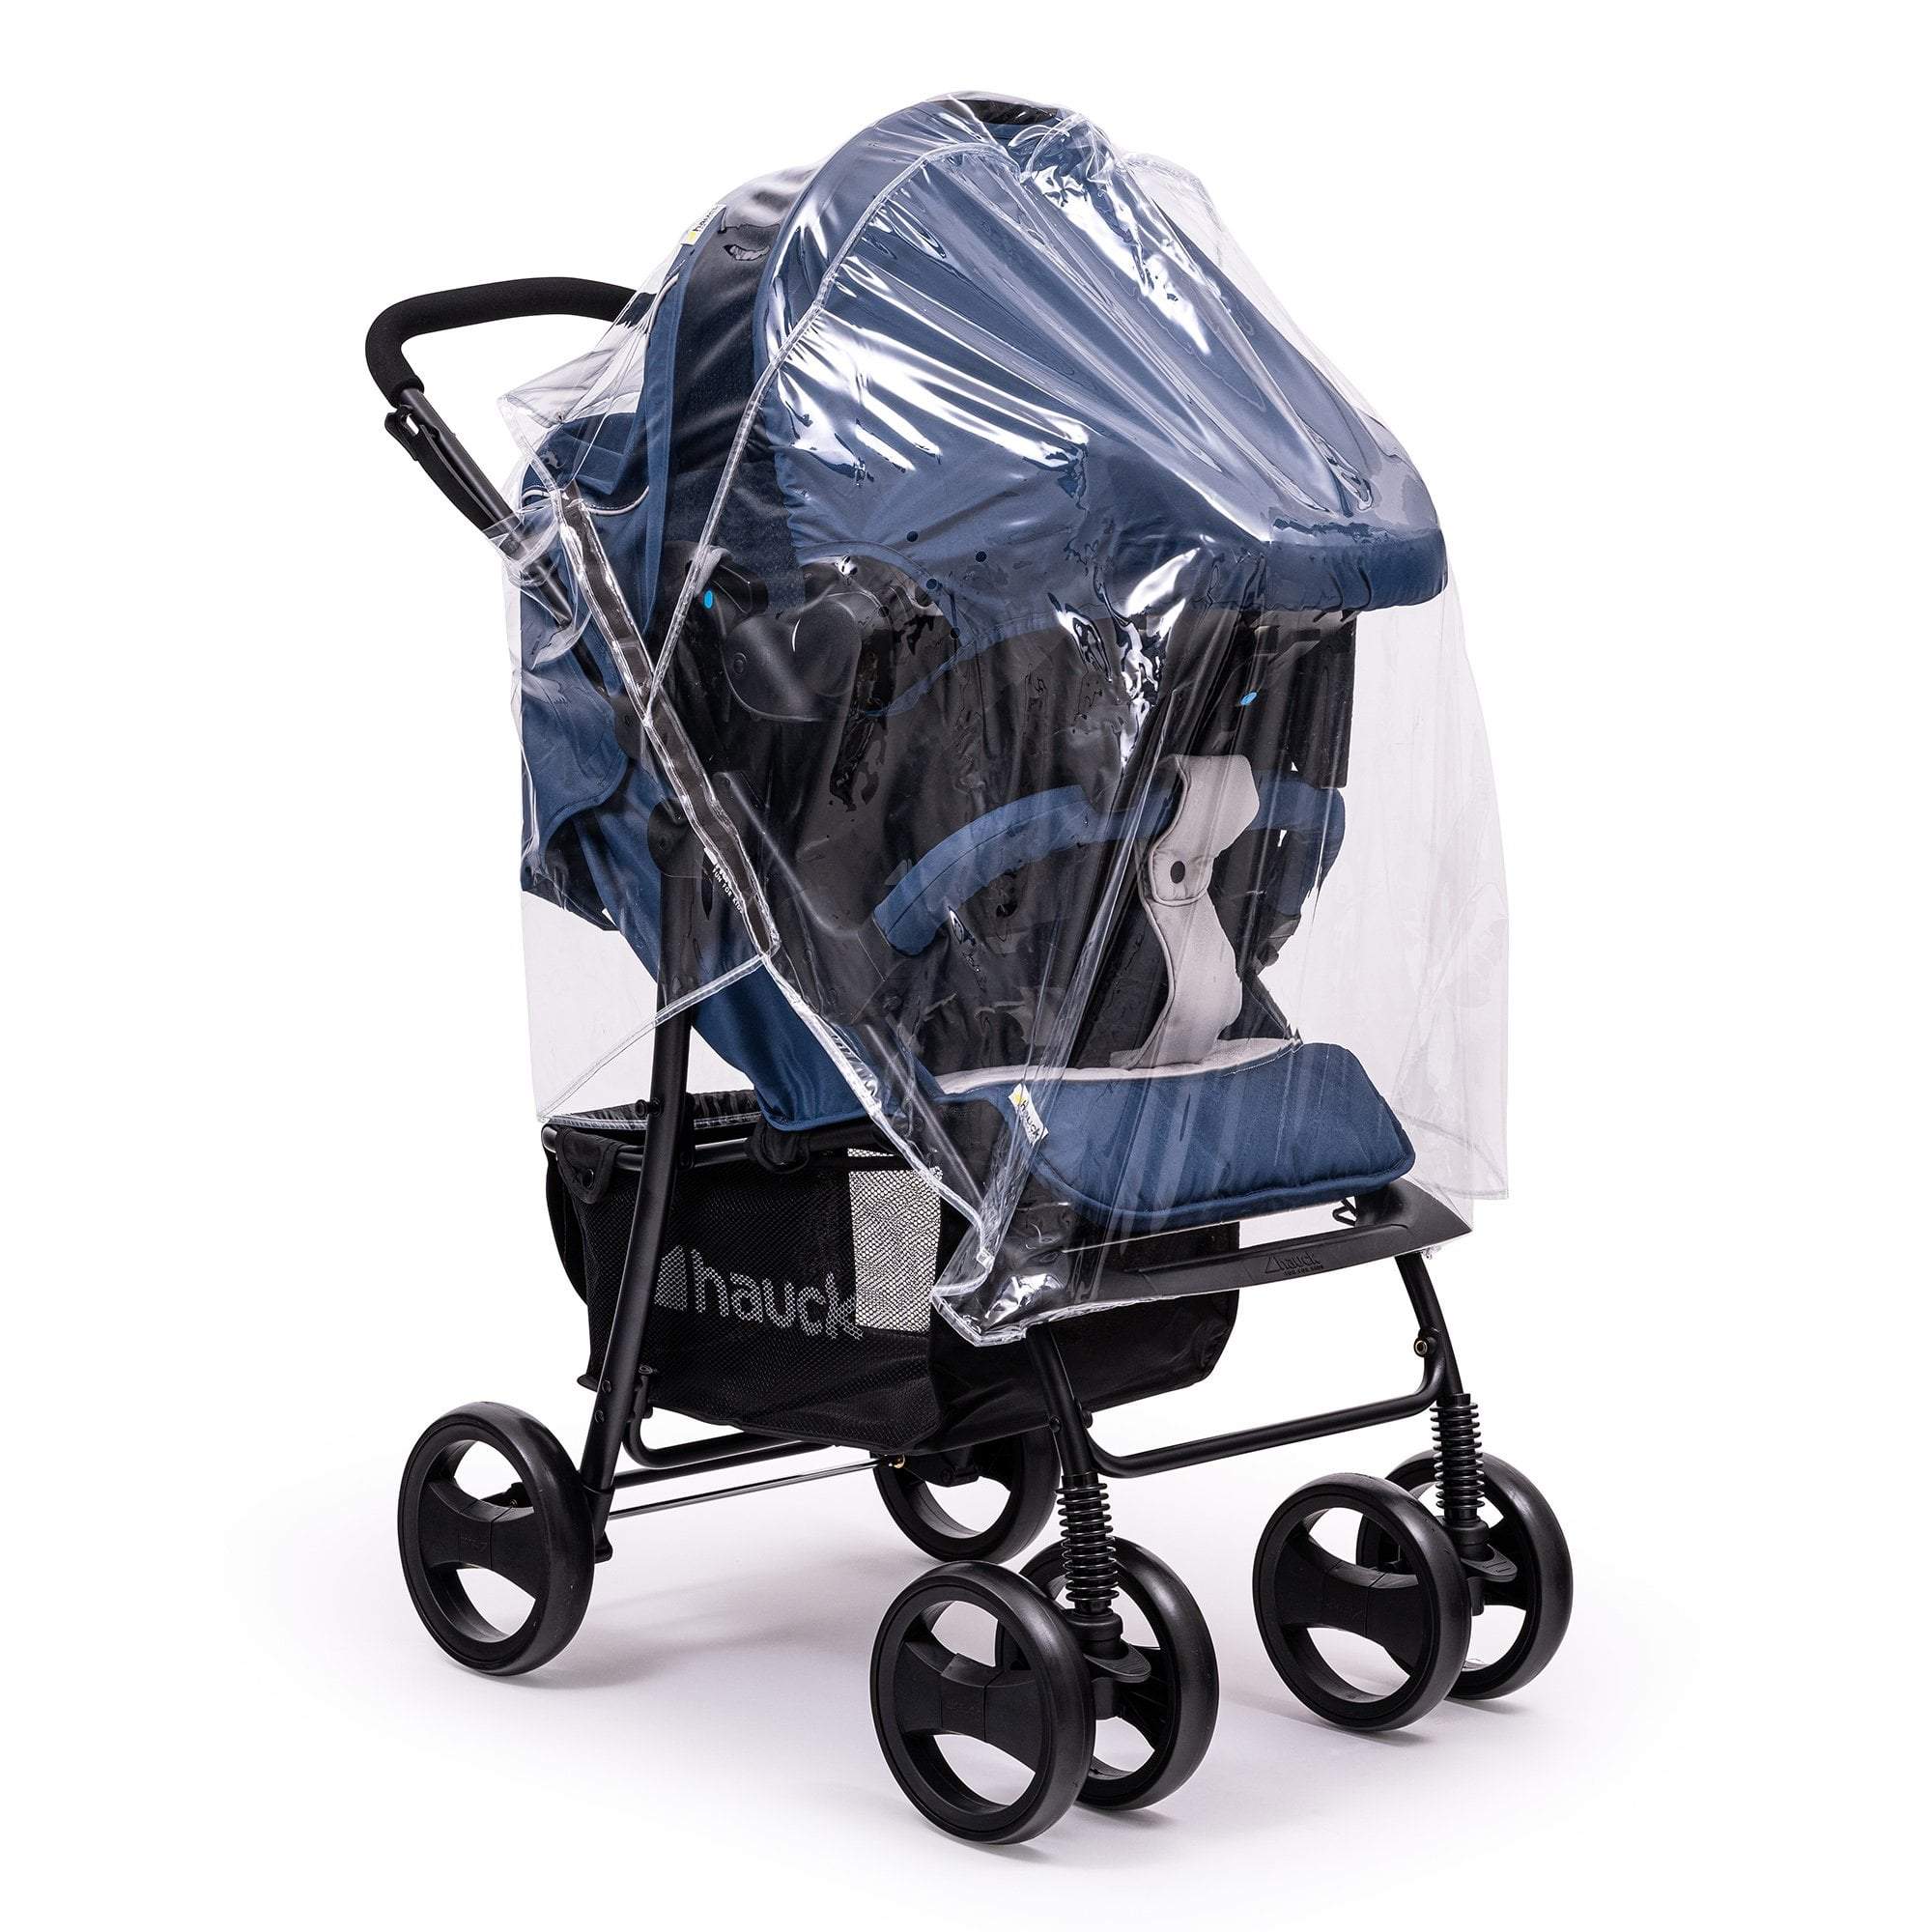 Travel System Raincover Compatible with Hesba - Fits All Models - For Your Little One